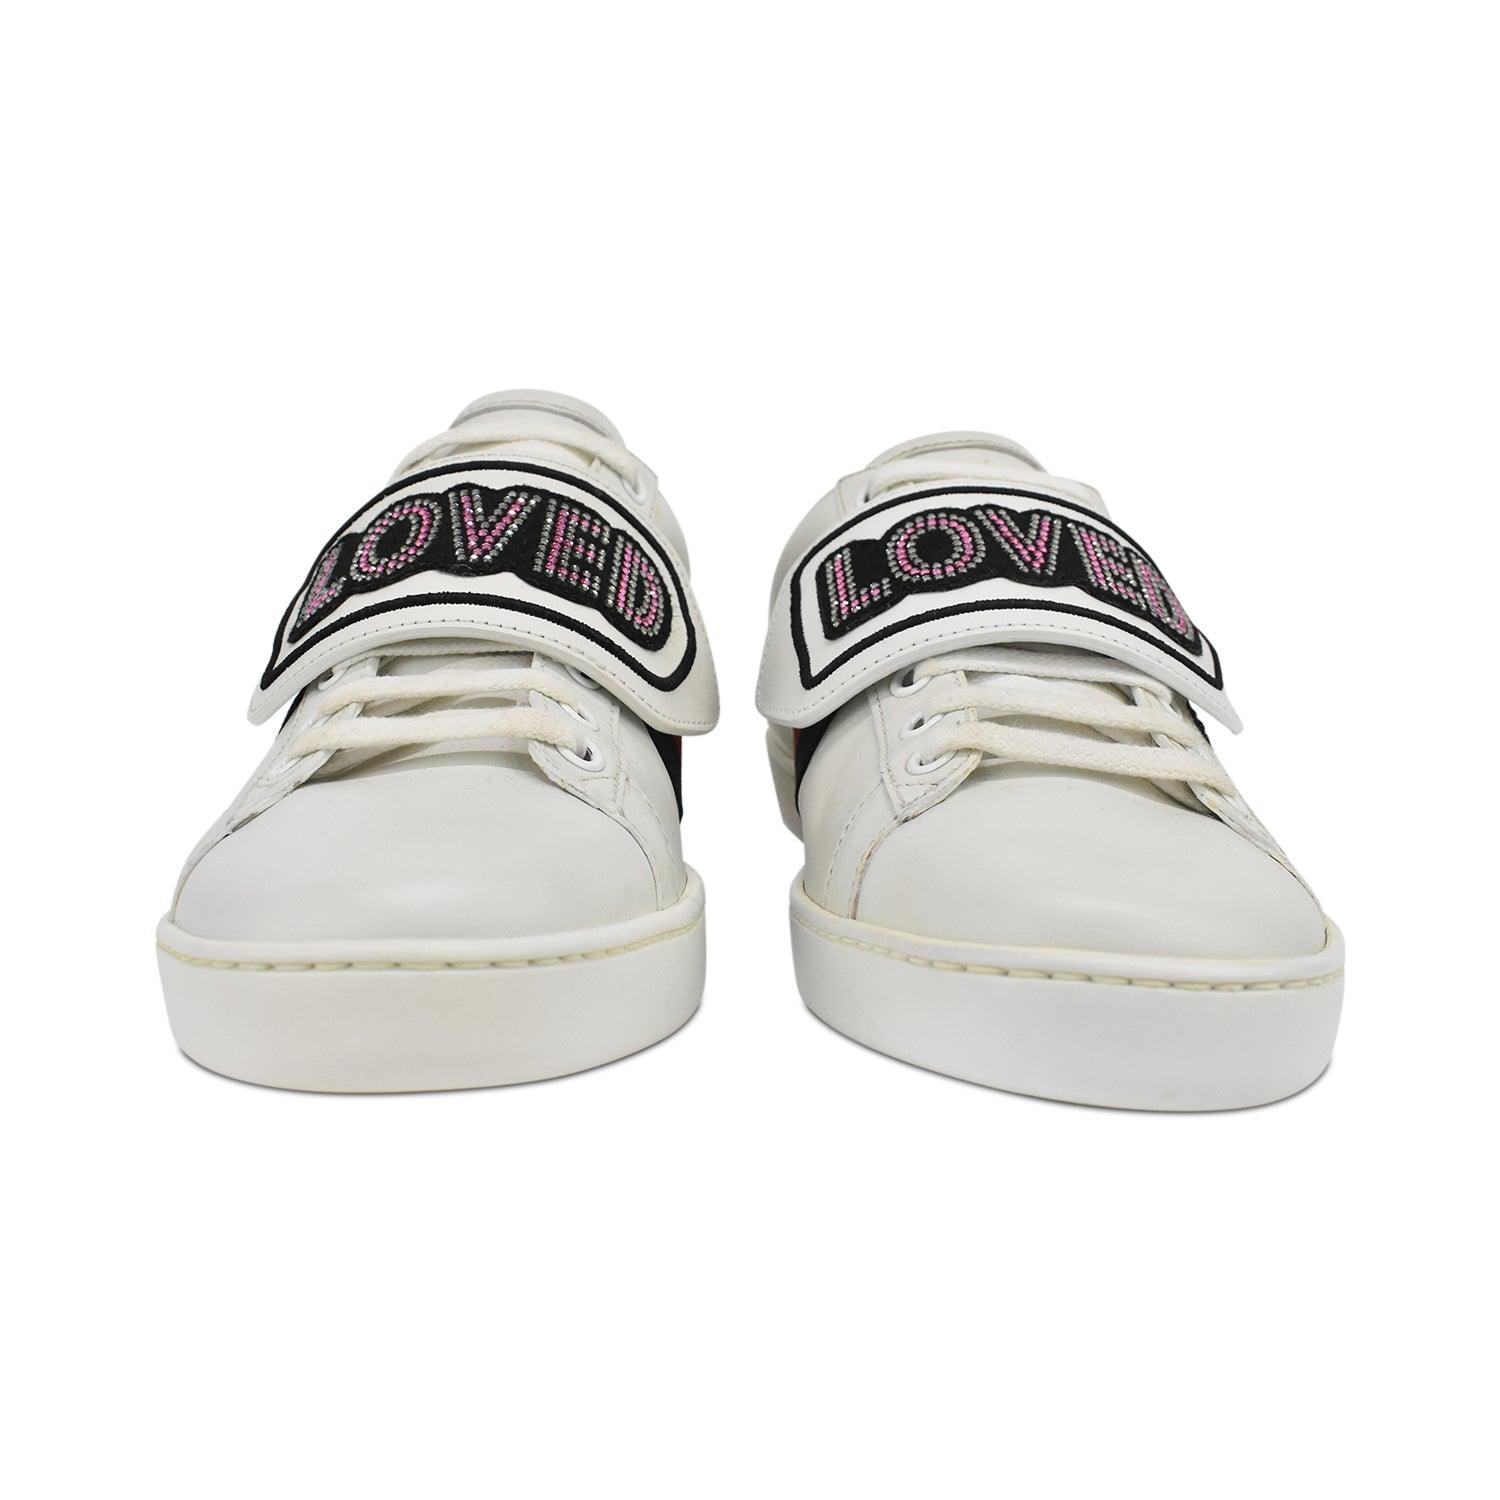 Gucci 'Loved' Sneakers - Women's 37.5 - Fashionably Yours